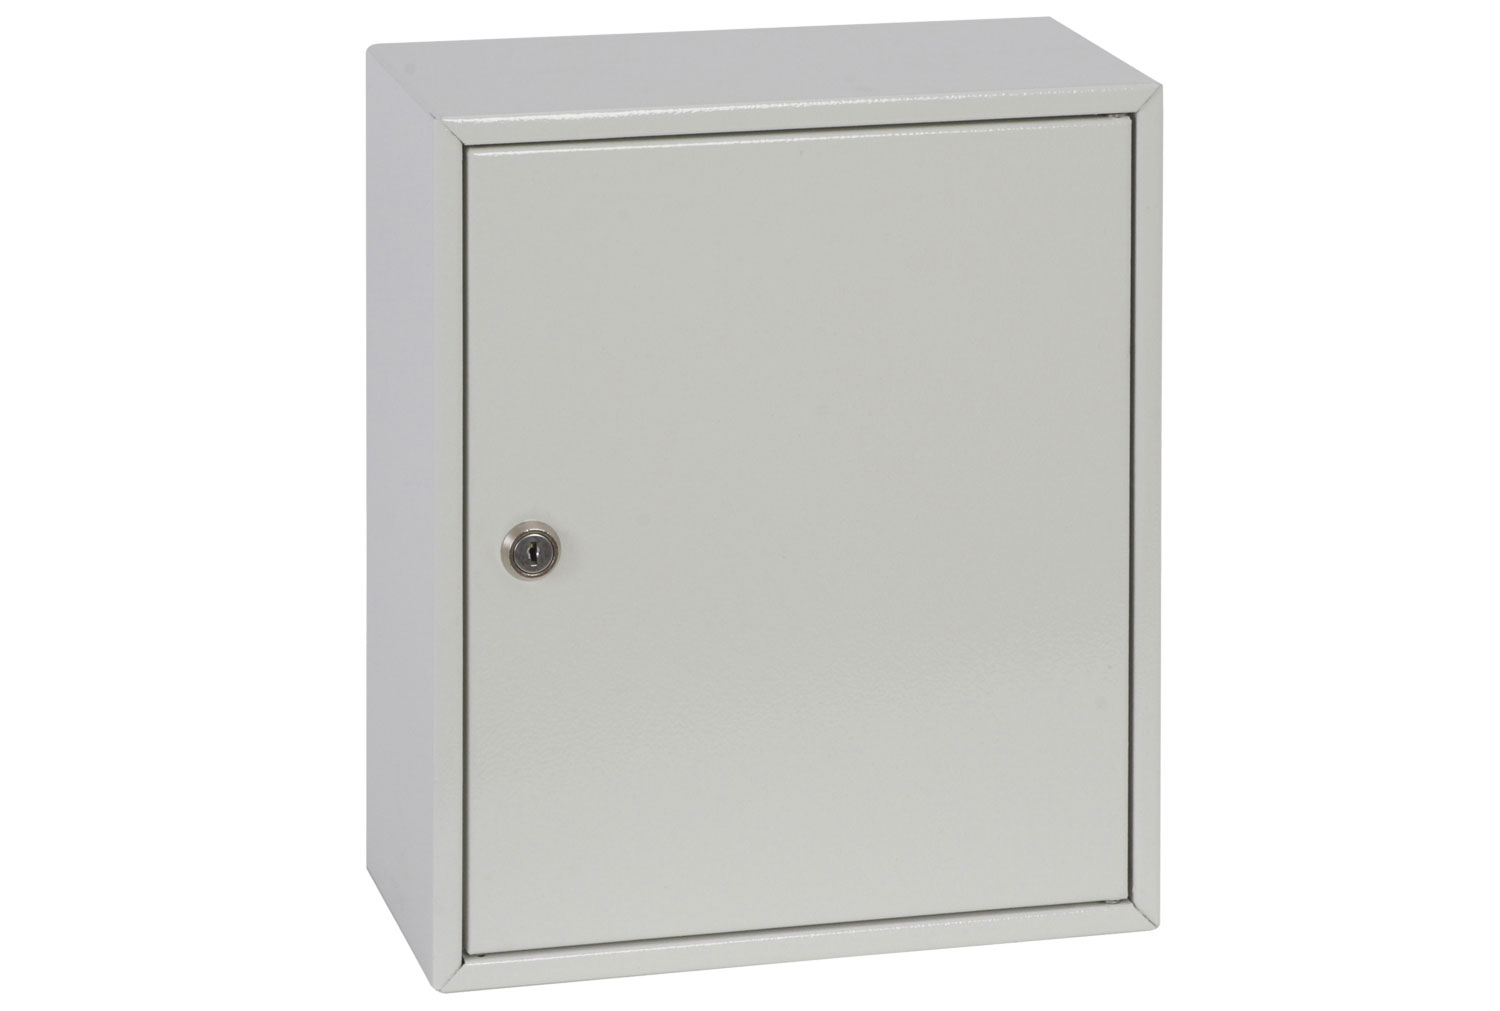 Phoenix KC0501K 24 Hook Deep Plus And Padlock Key Cabinet With Key Lock , Express Delivery